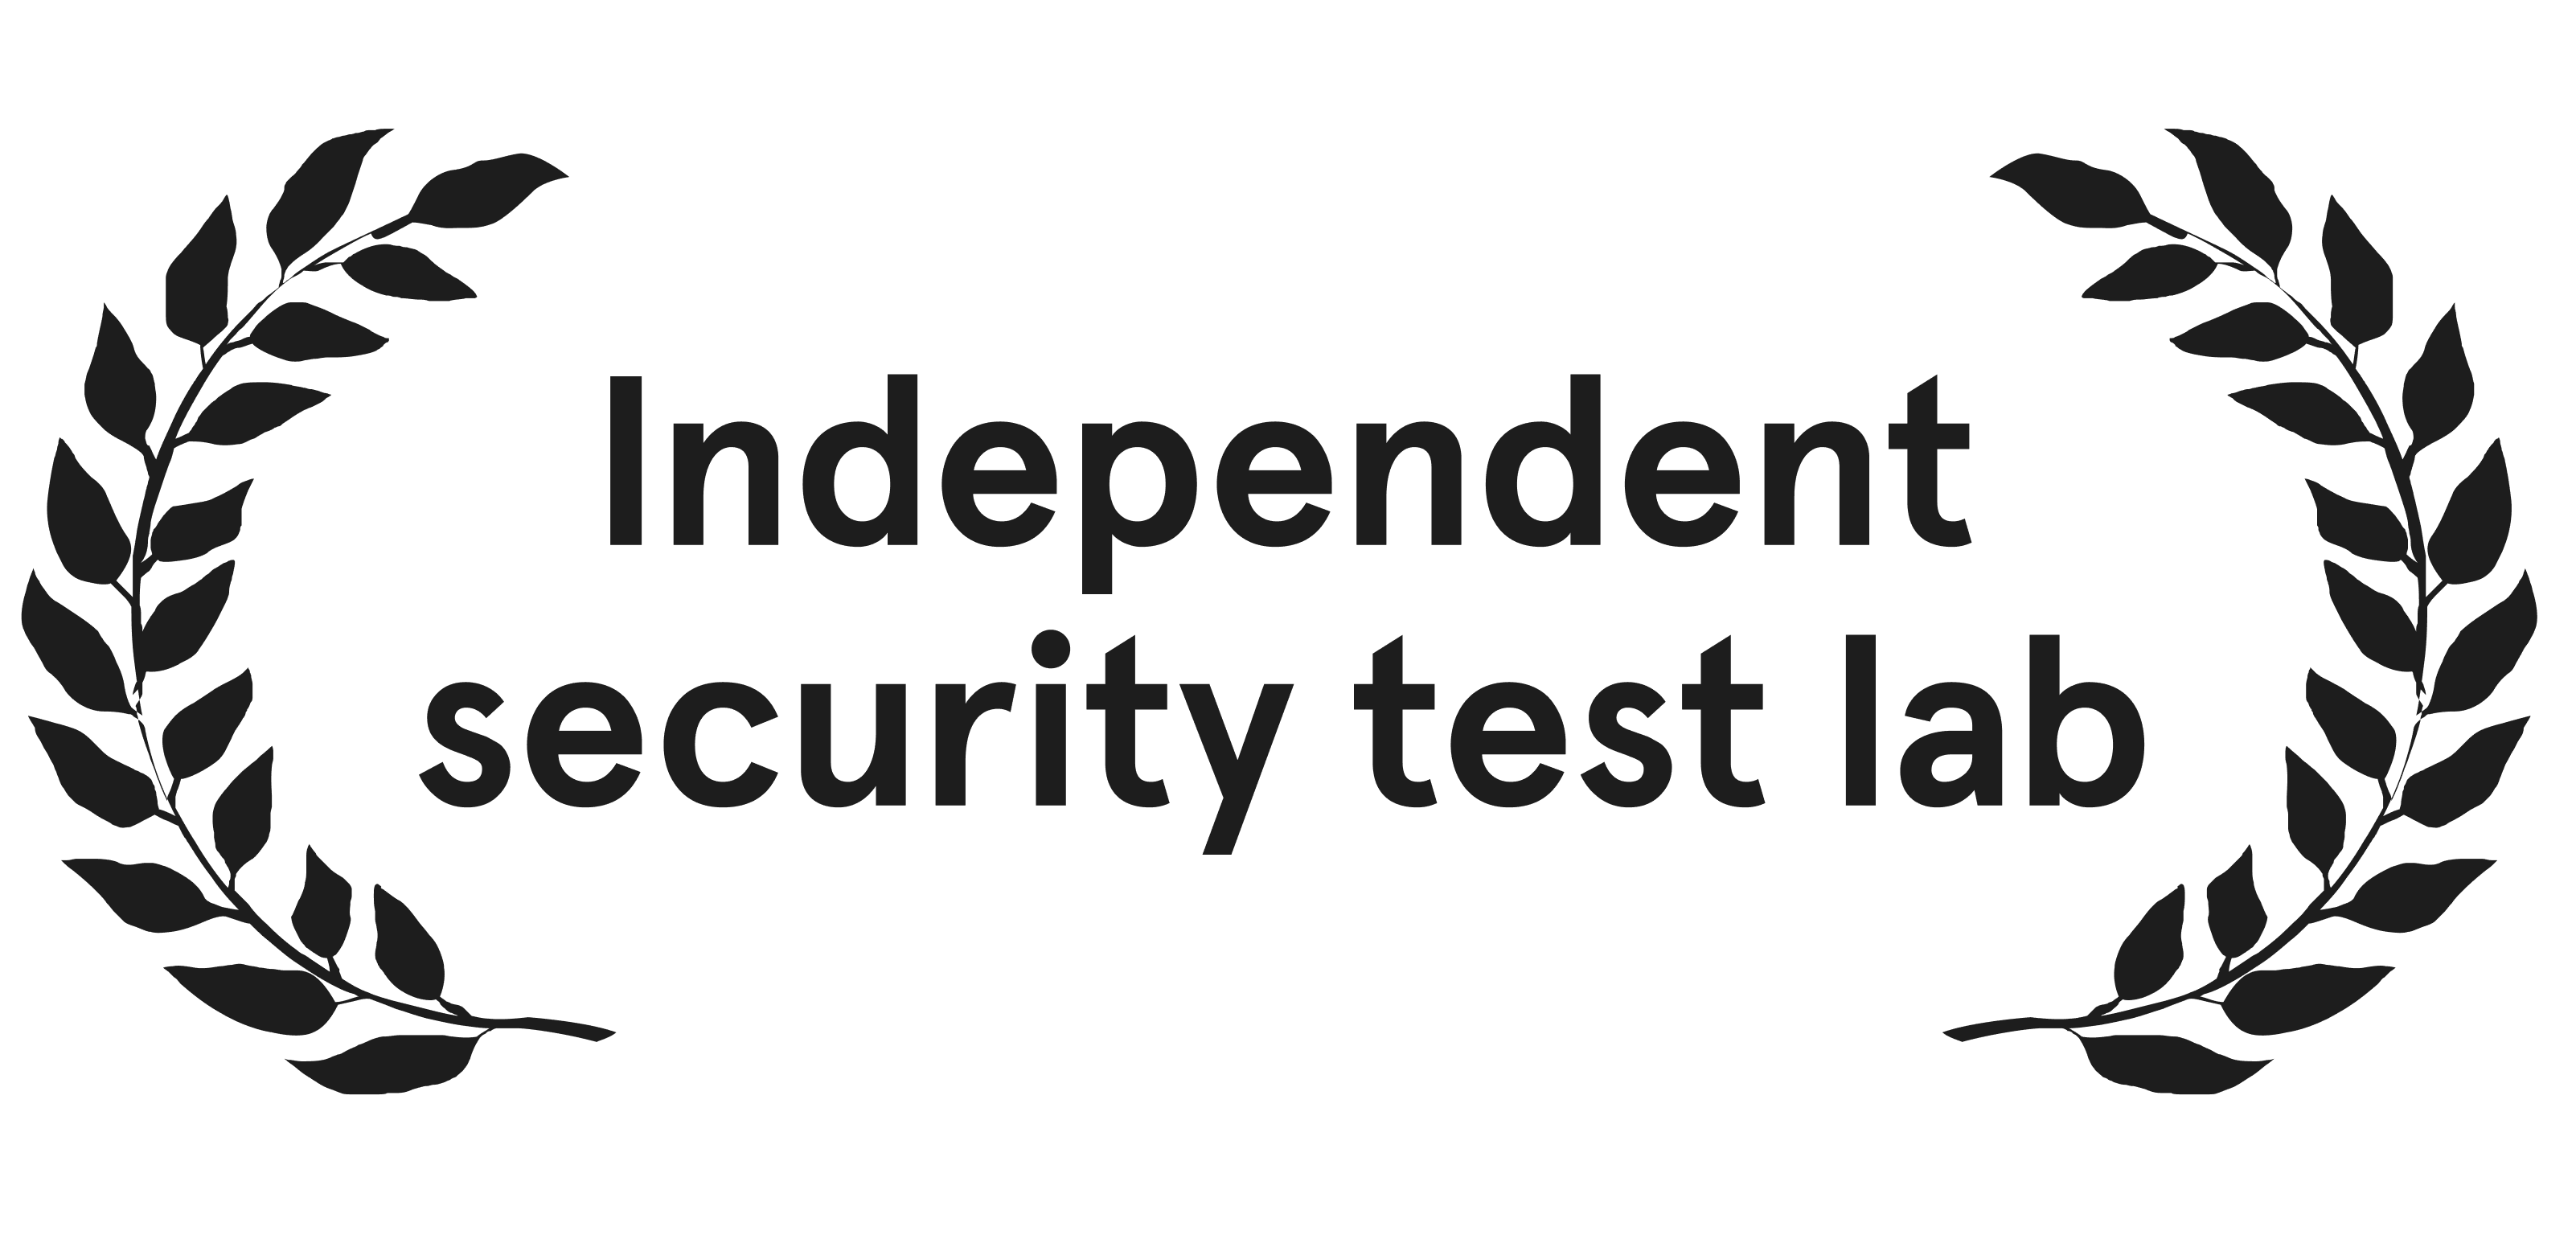 Independent security test lab